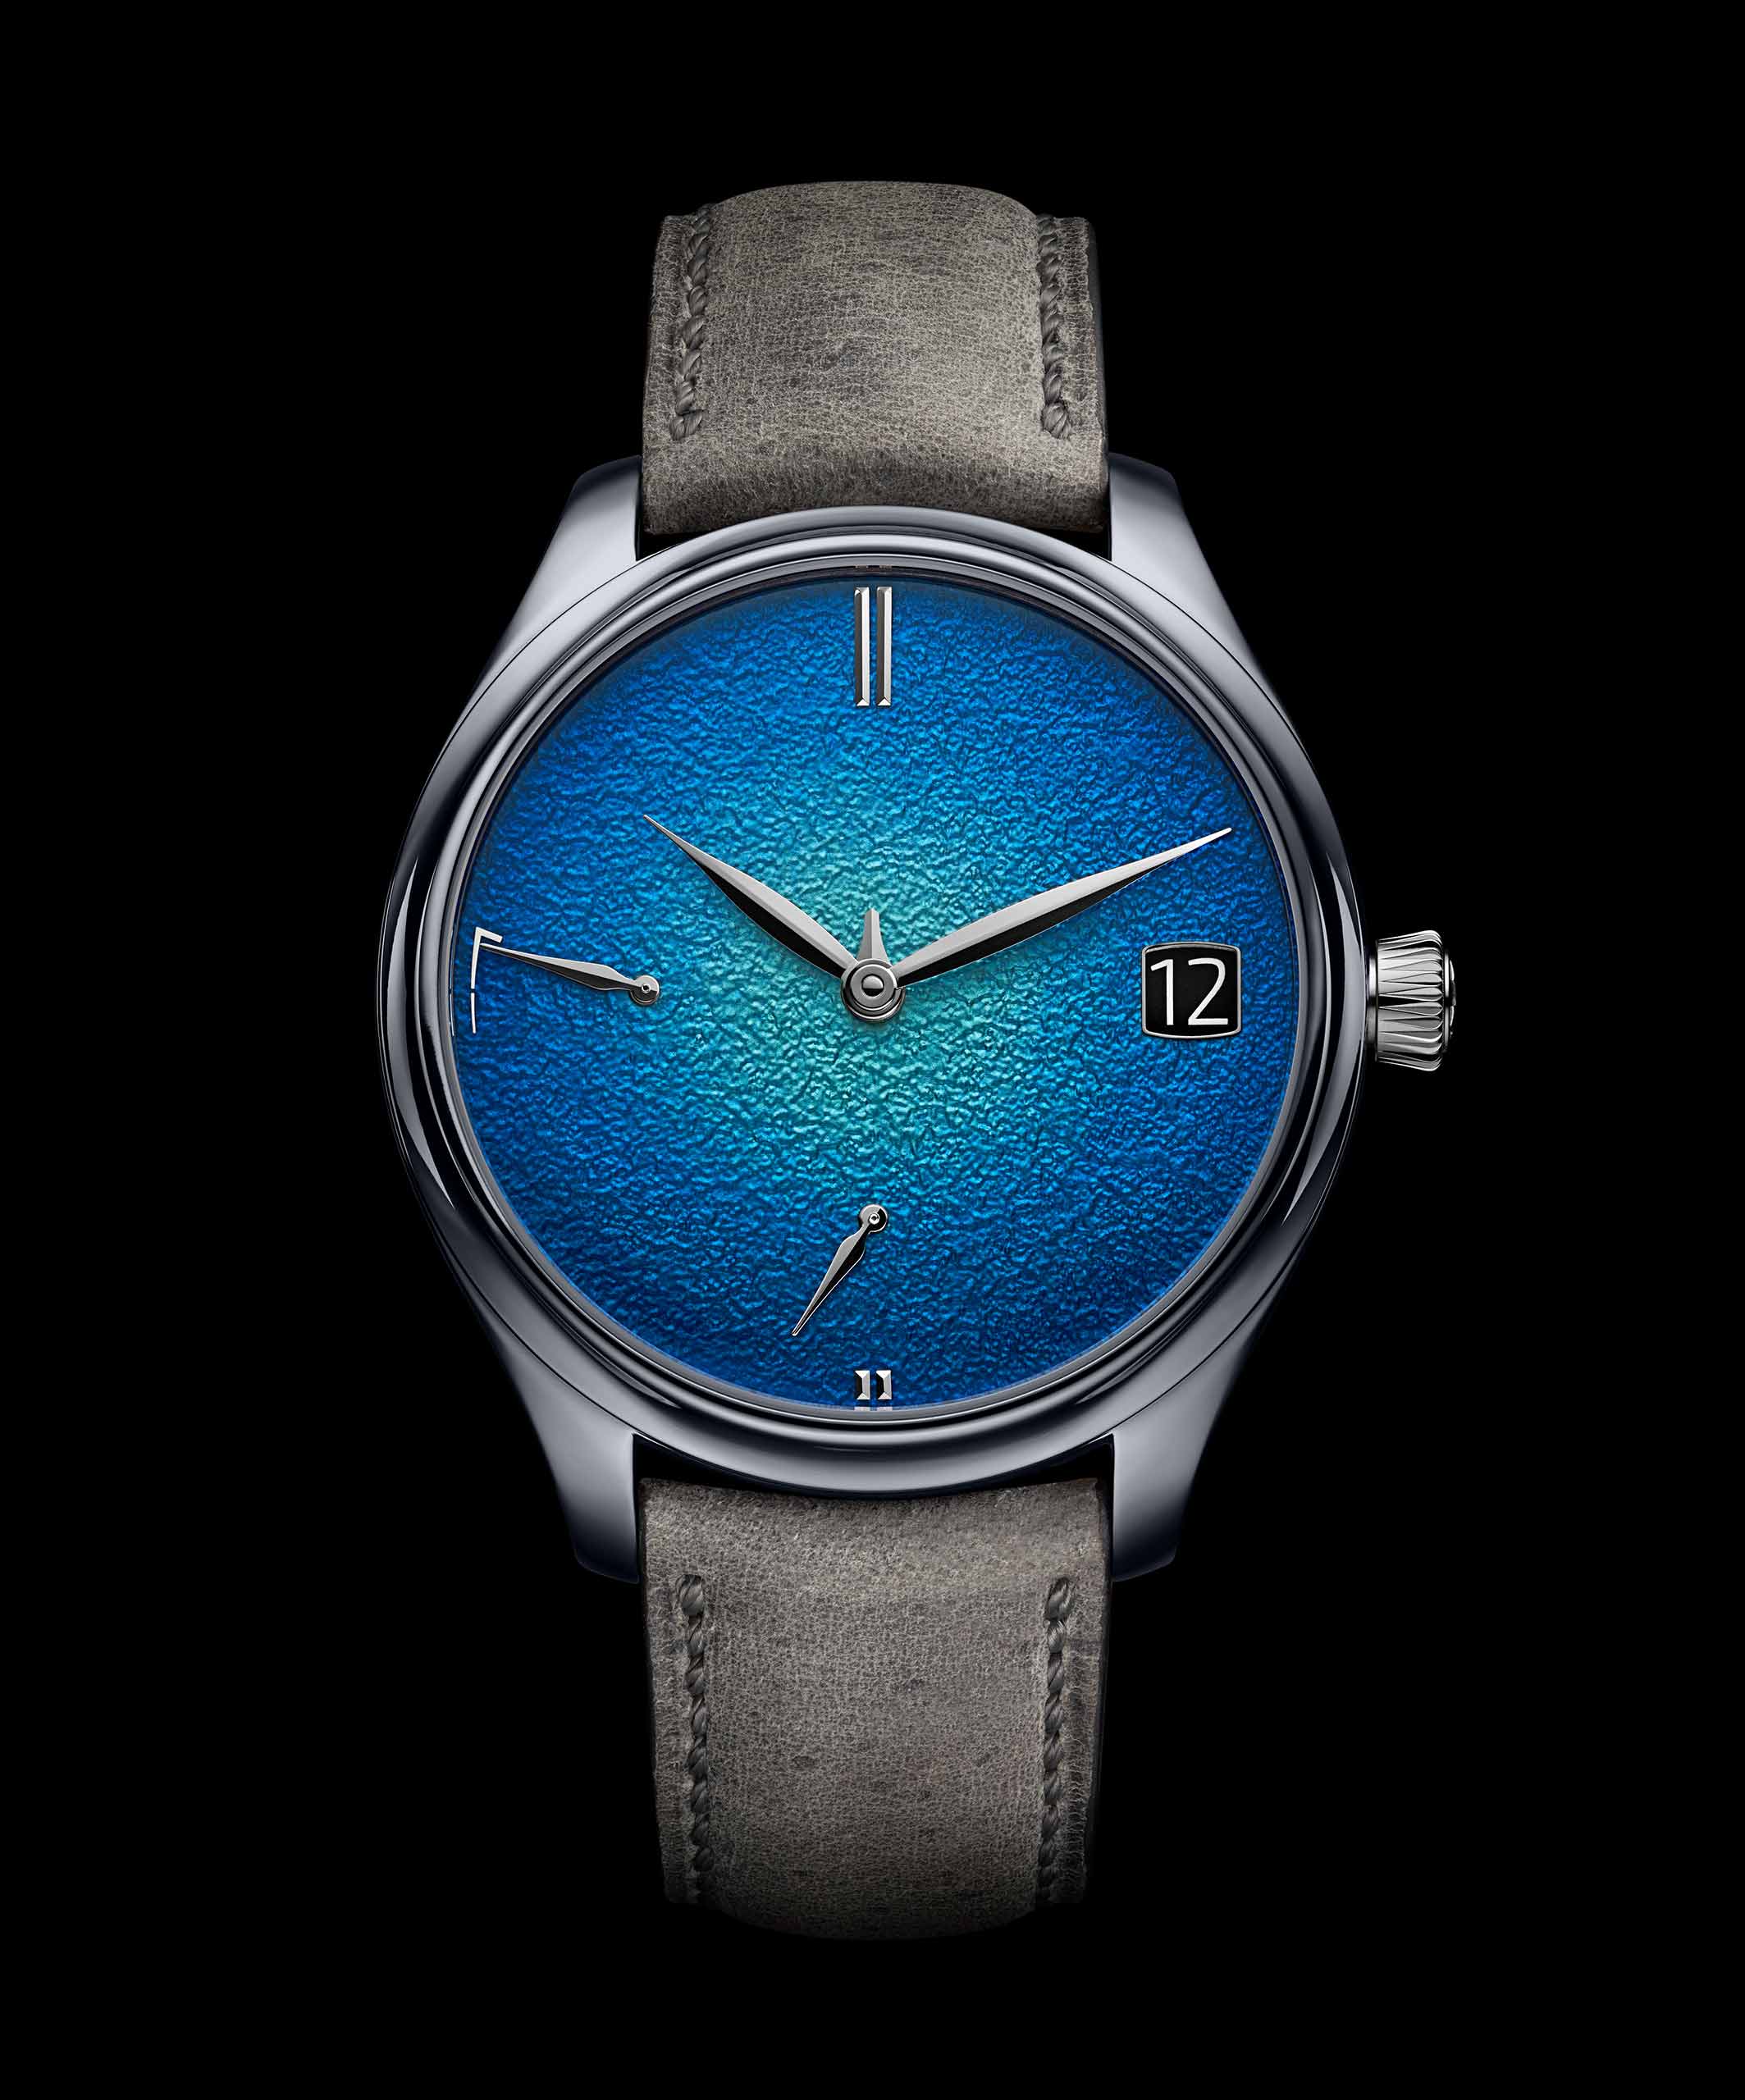 H. Moser Debuts the Endeavour Perpetual Calendar Tantalum Blue Enamel, their First Watch in the Exotic Metal